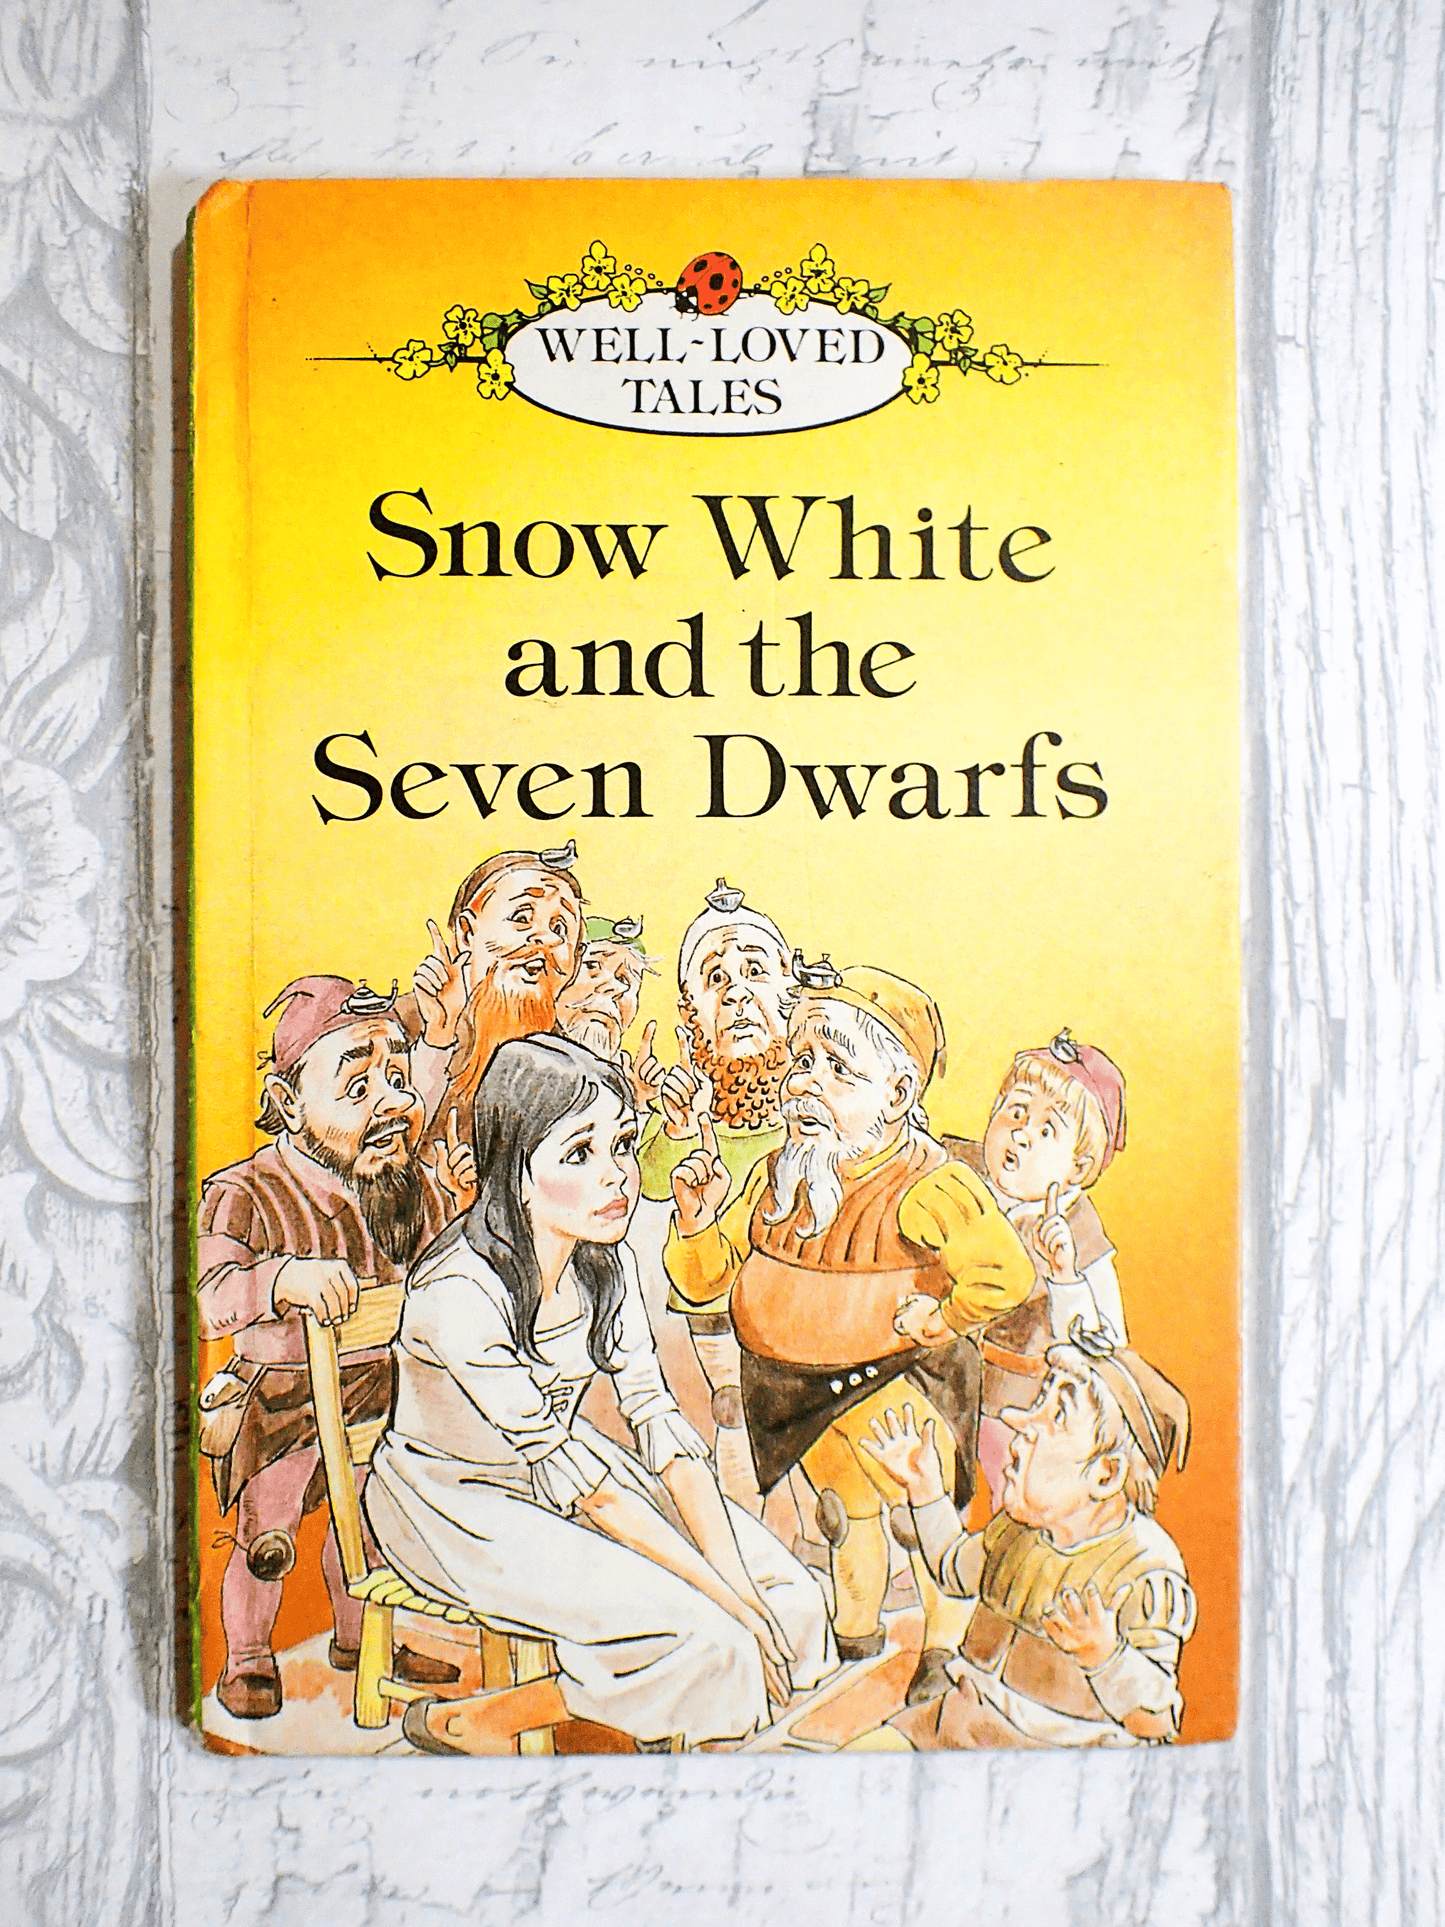 Vintage Ladybird Book Snow White against pale grey background.